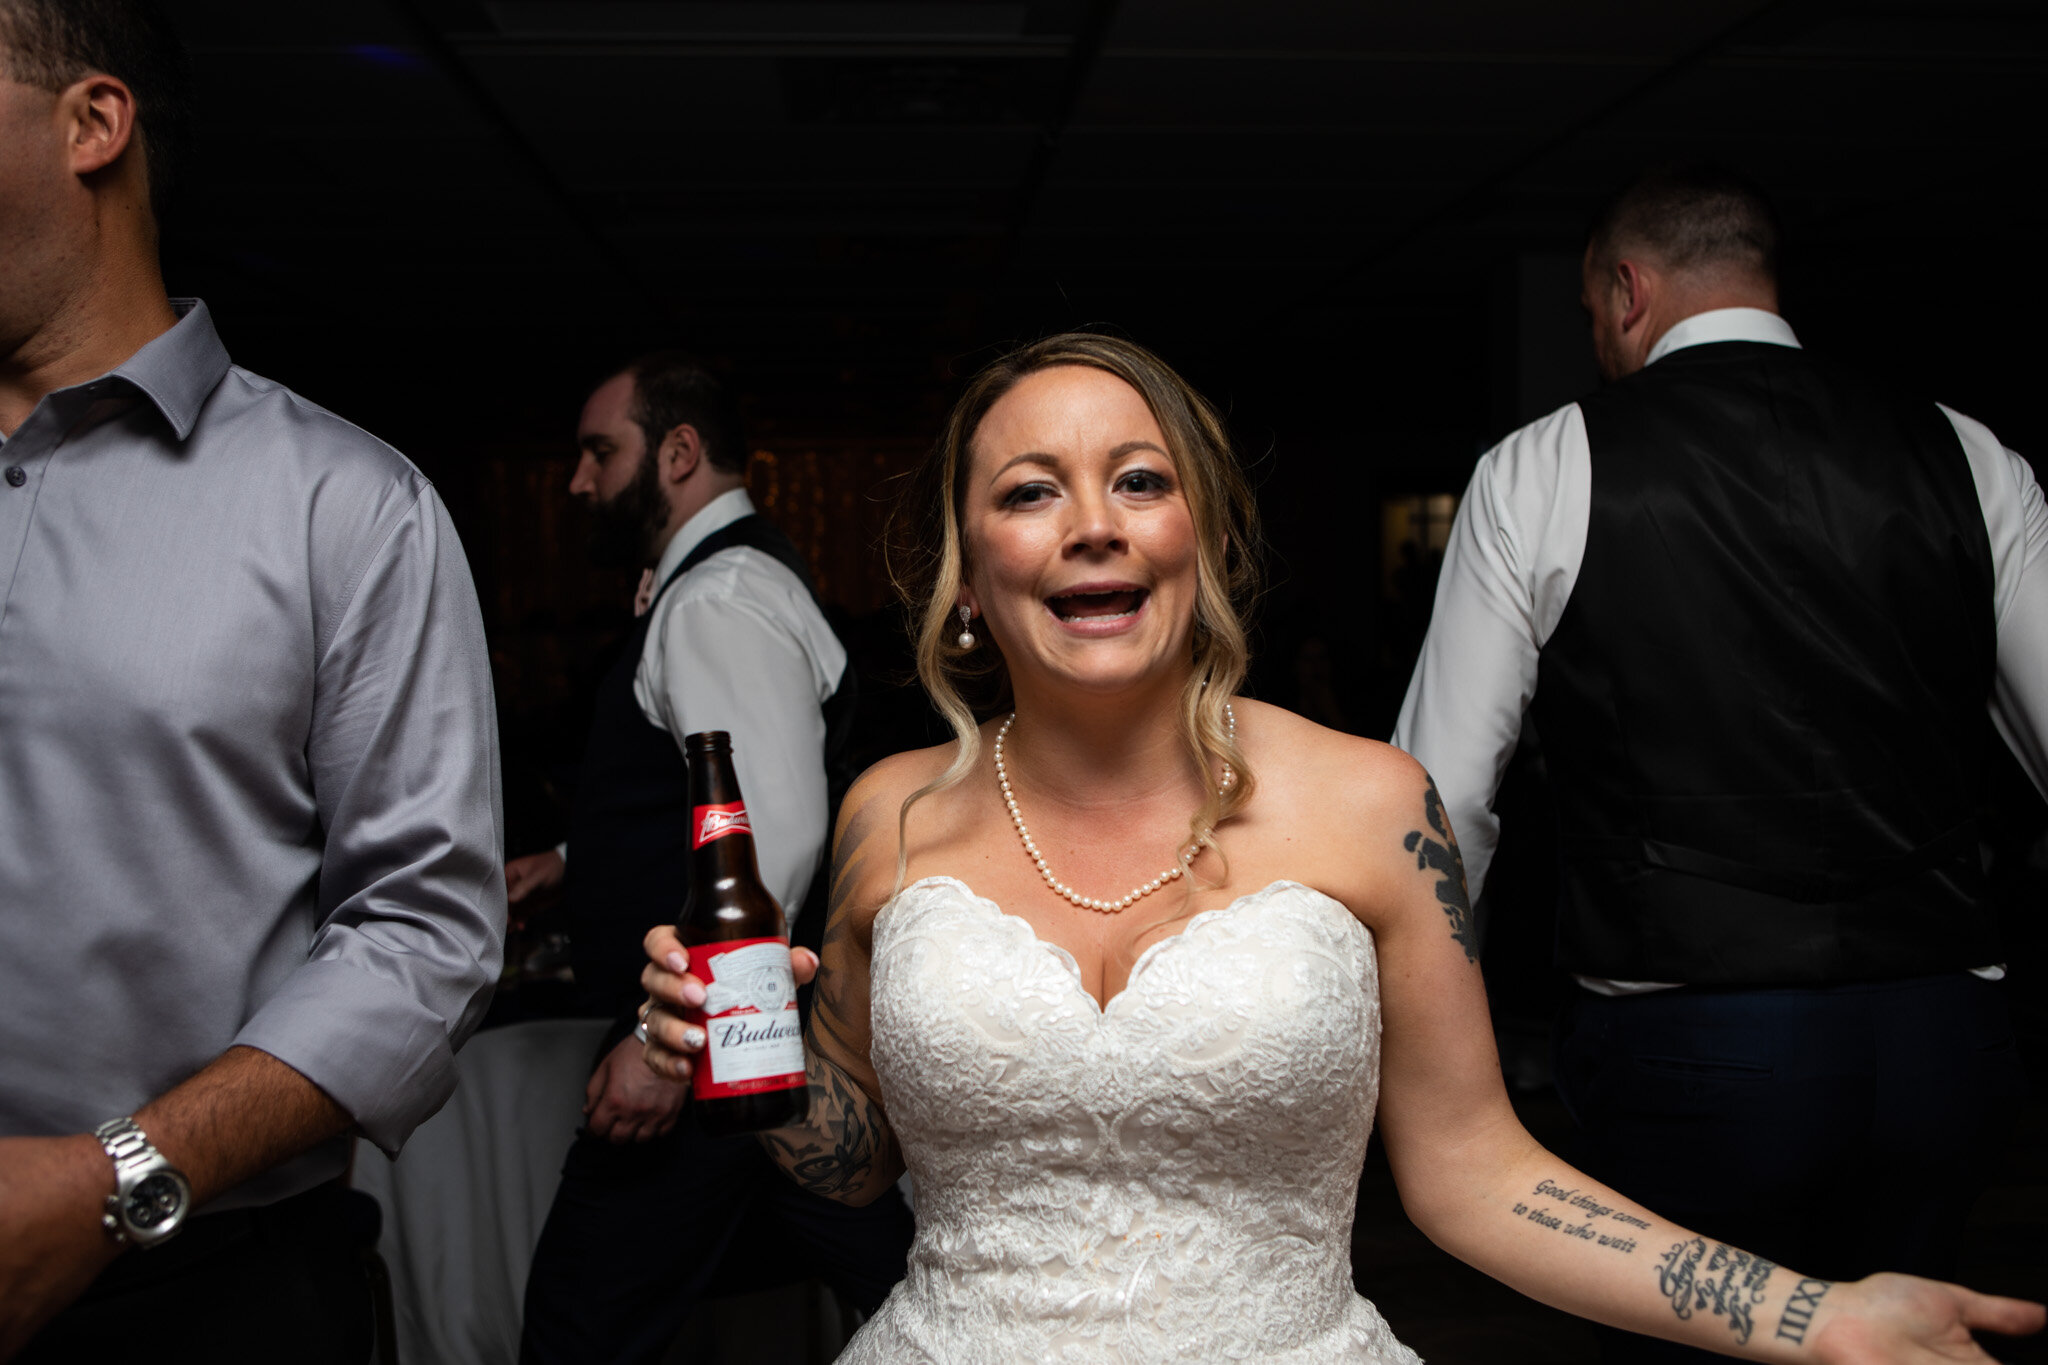 bride giving photographer a funny face during reception dancing.jpg